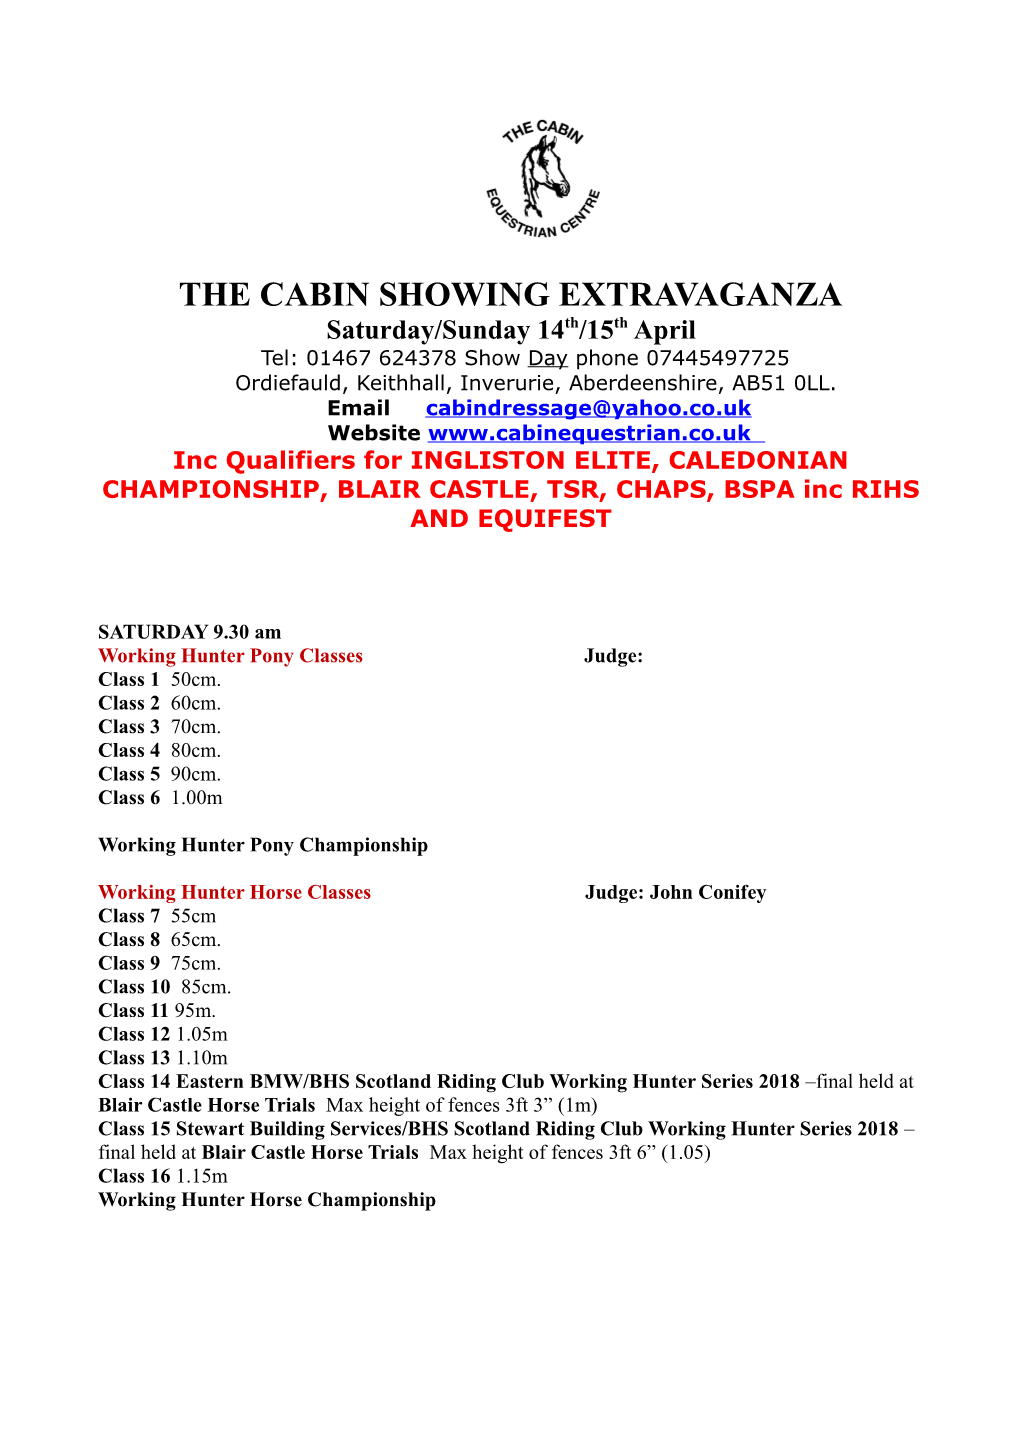 The Cabin Showing Extravaganza